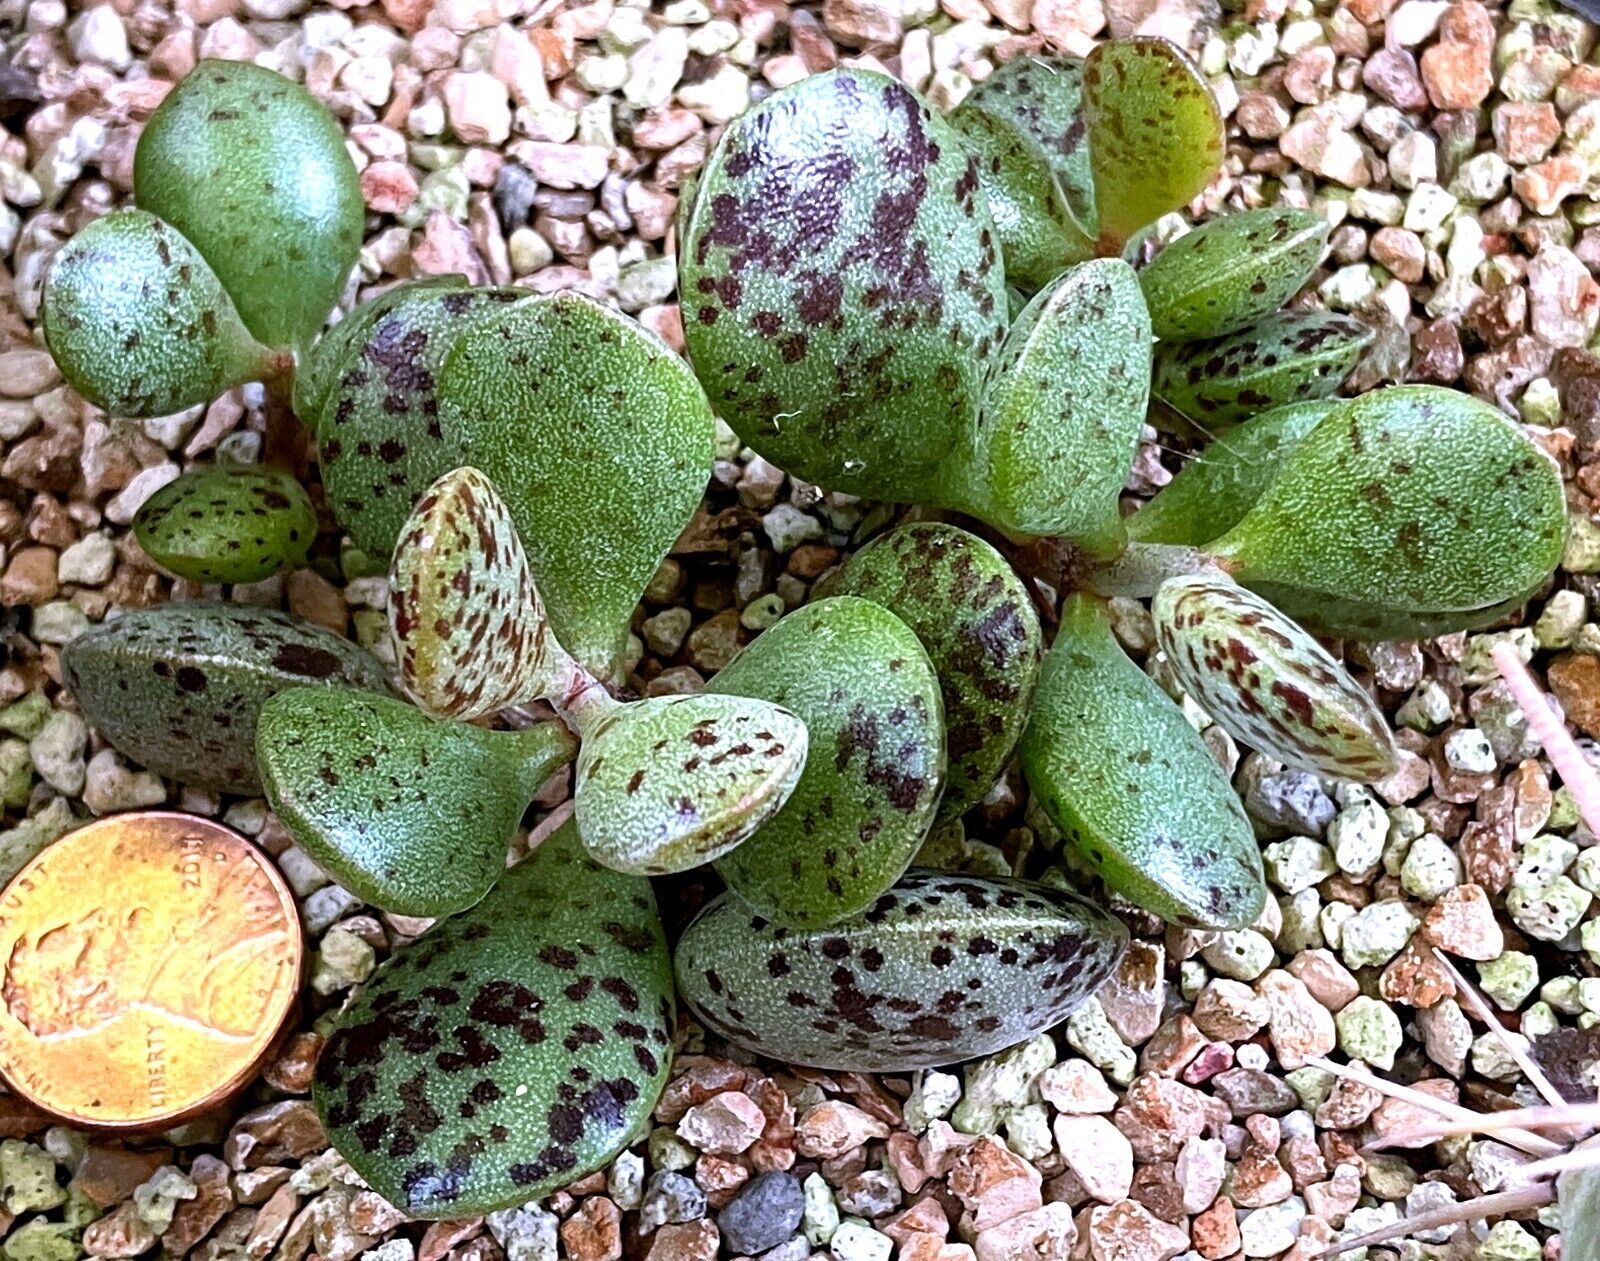 Succulent Plant--Adromischus marianiae marianiae--Spotted and Chunky